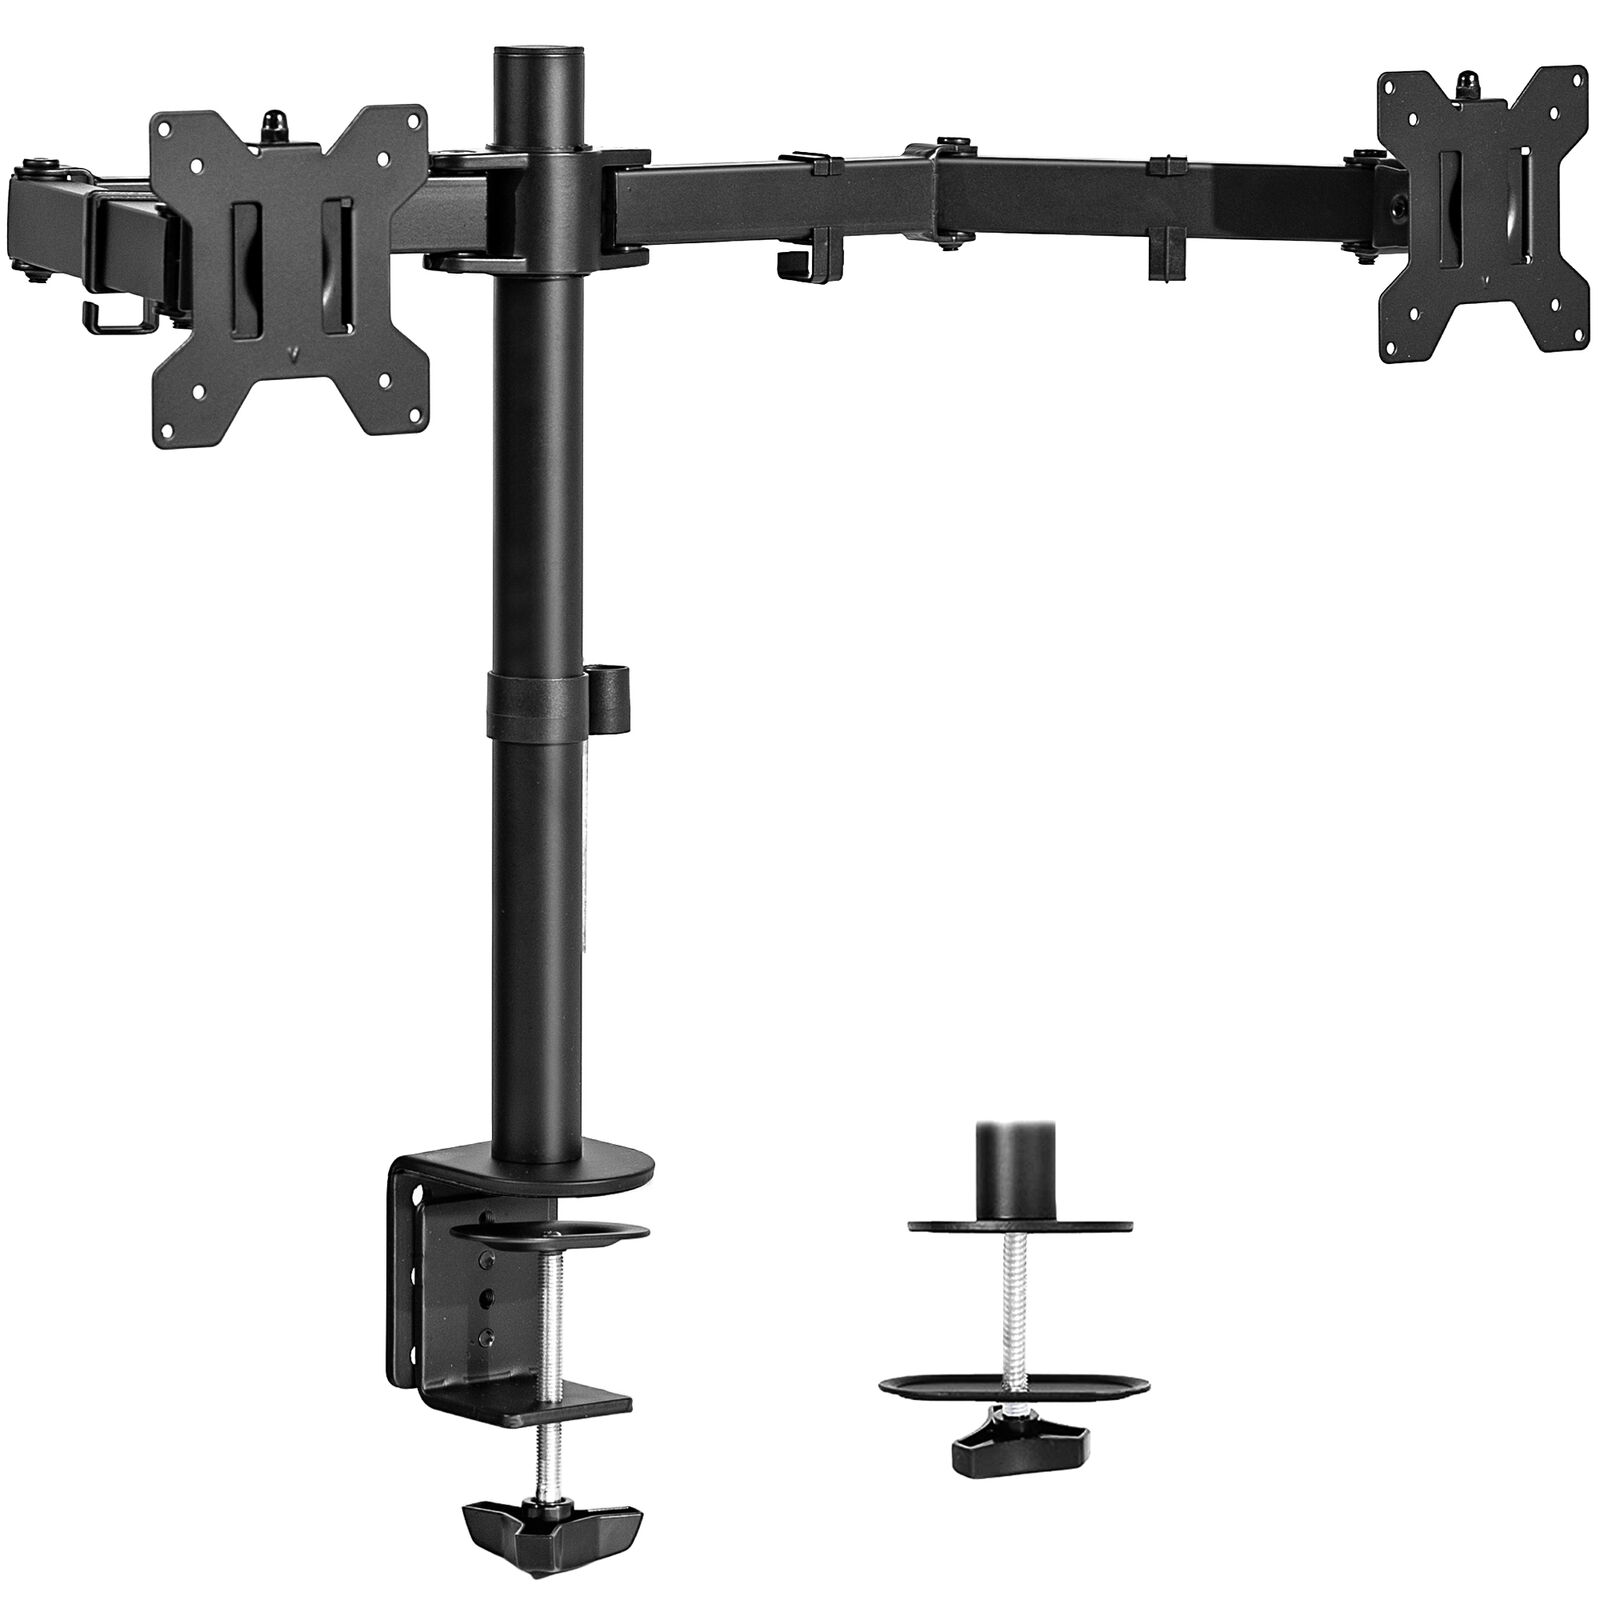 VIVO Black Dual Monitor Desk Mount Adjustable Stand, Fits Screens up to 30